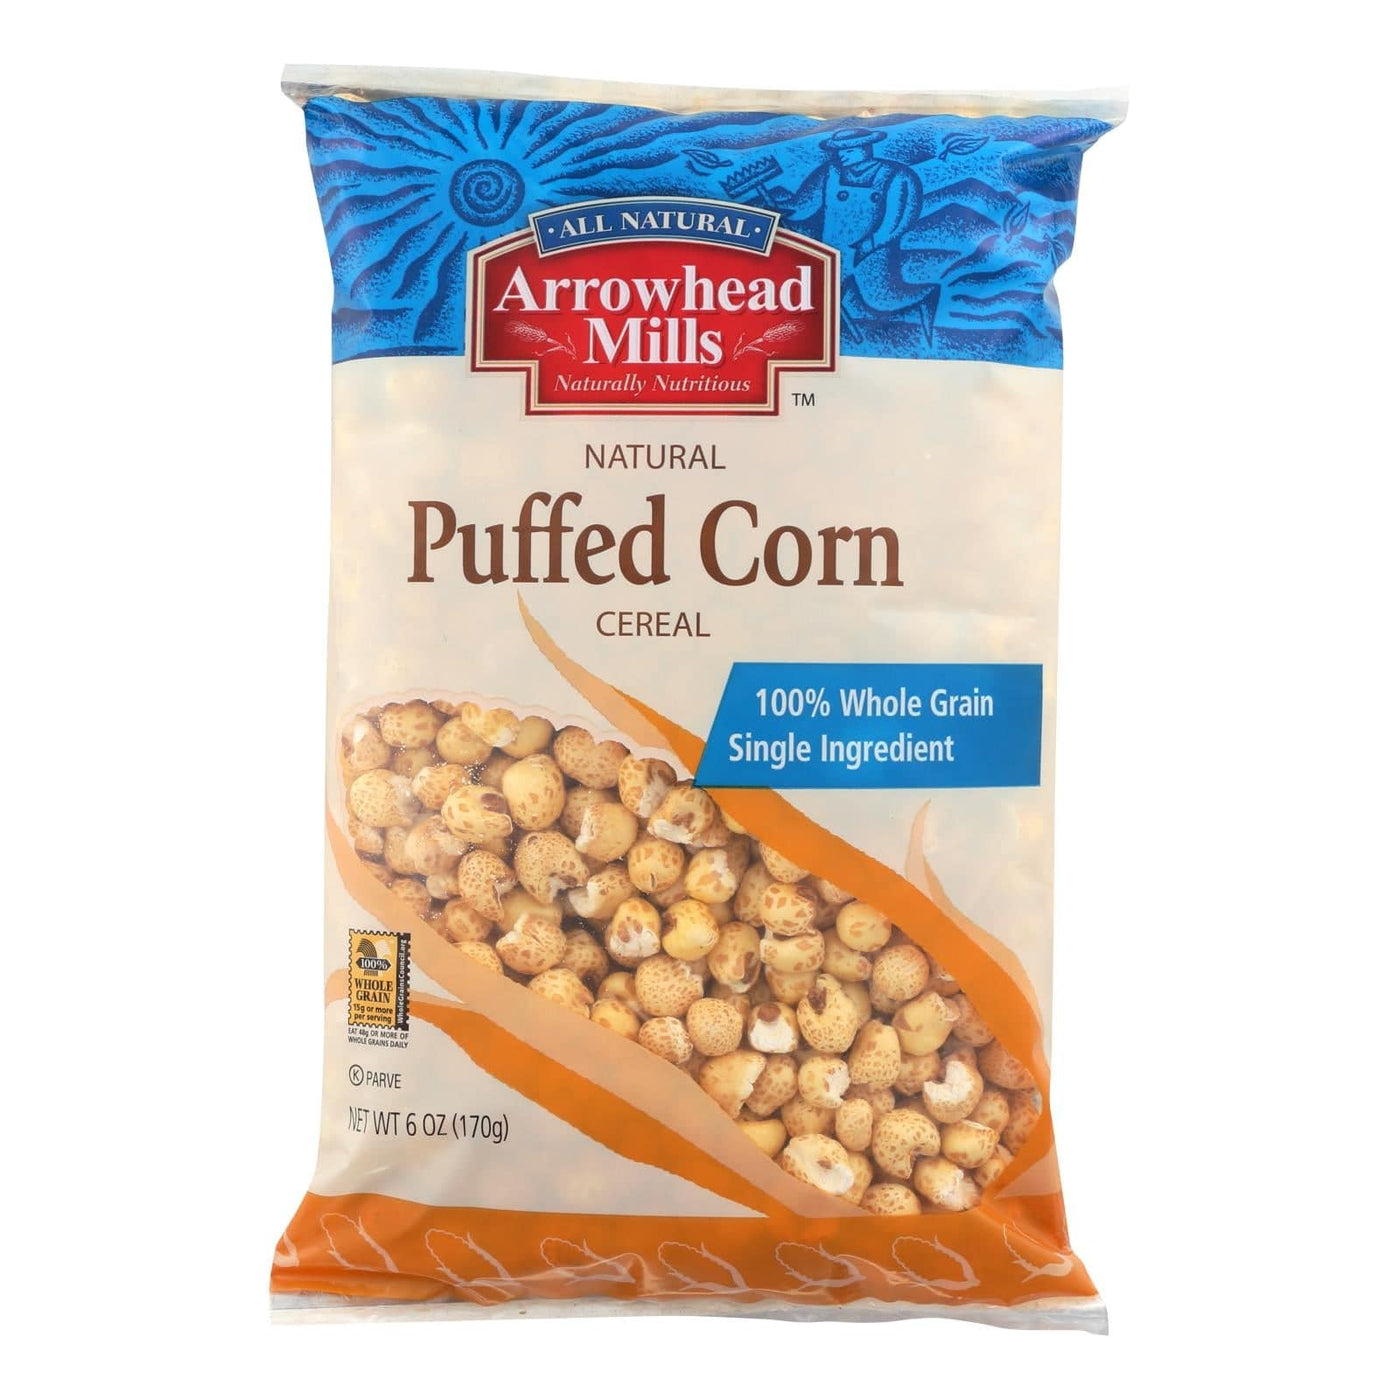 Buy Arrowhead Mills - All Natural Puffed Corn Cereal - Case Of 12 - 6 Oz.  at OnlyNaturals.us